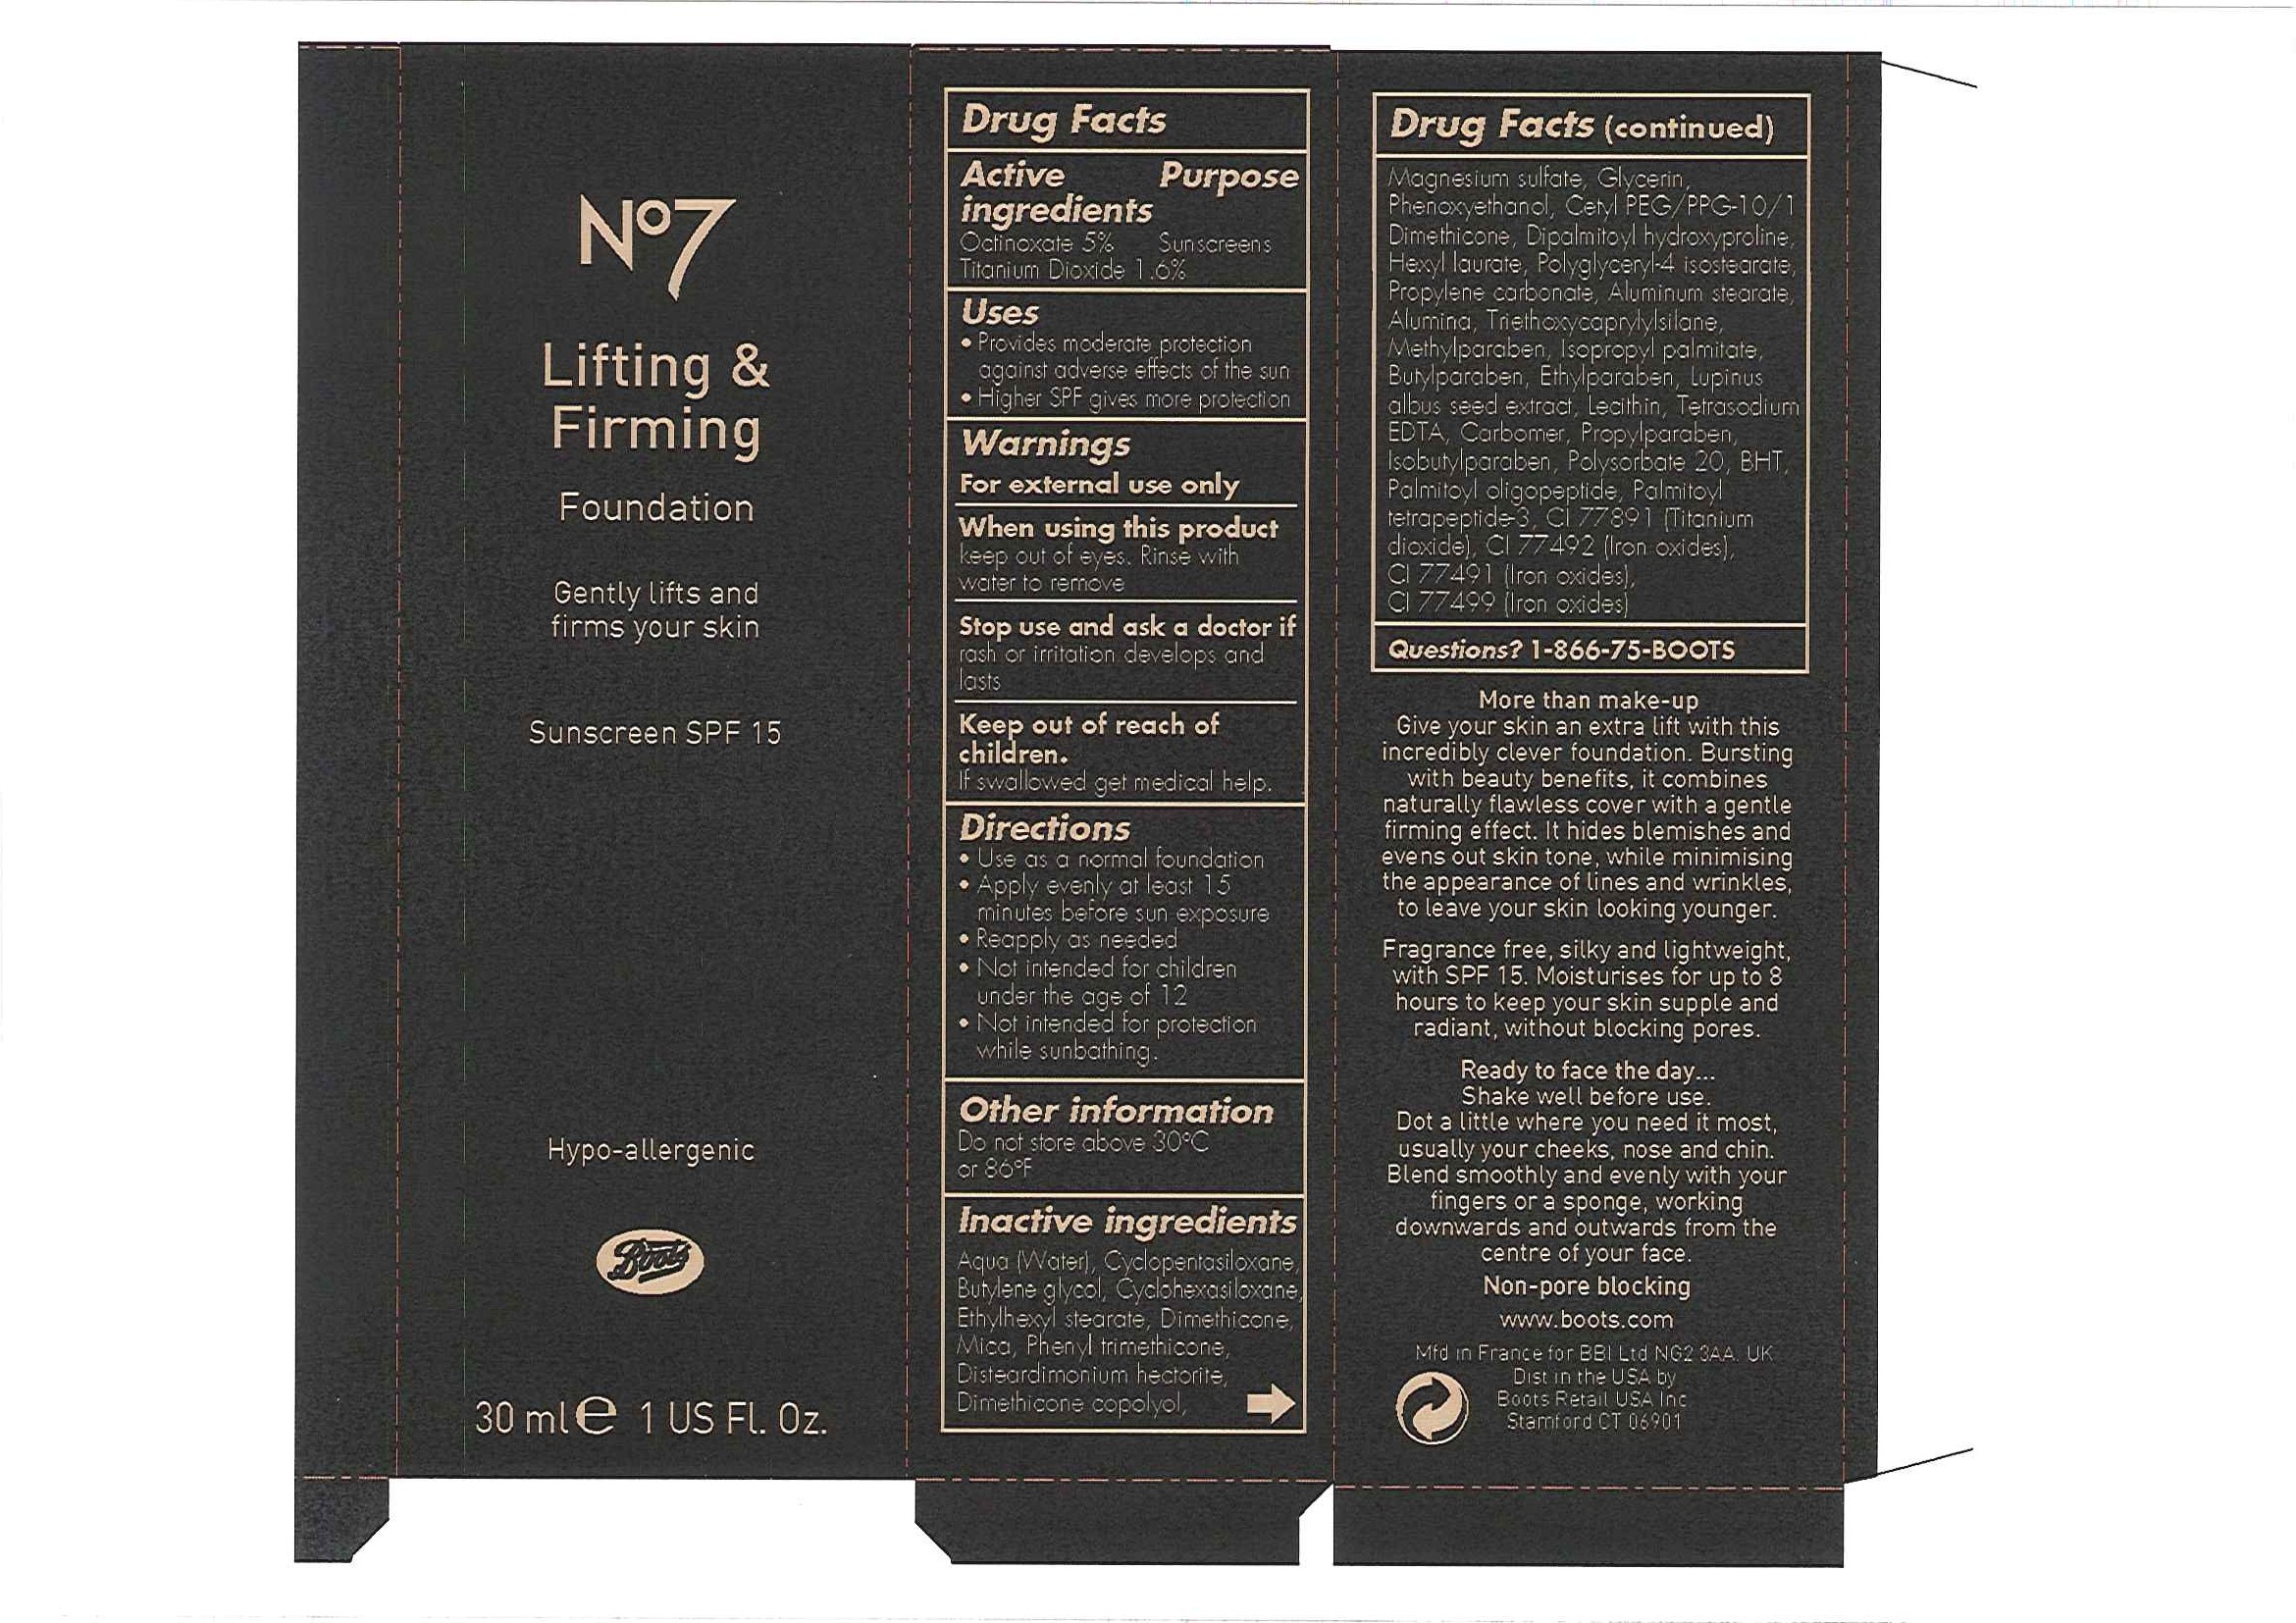 Lifting and Firming Fnd New Ivory carton